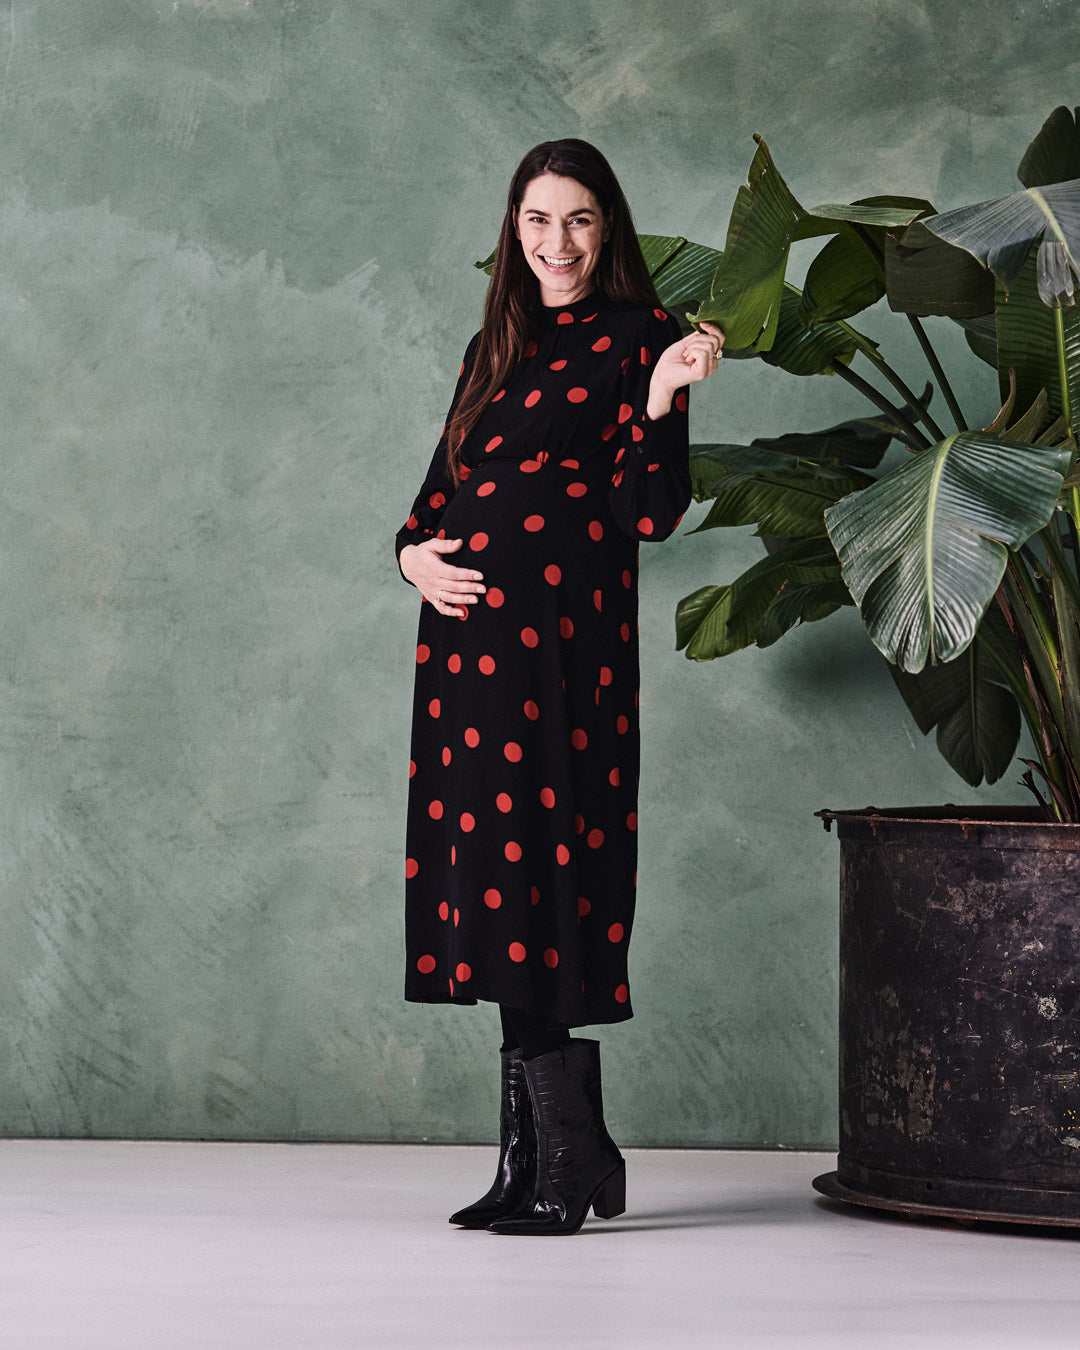 Pregnant woman standing next to a plant with compression socks.